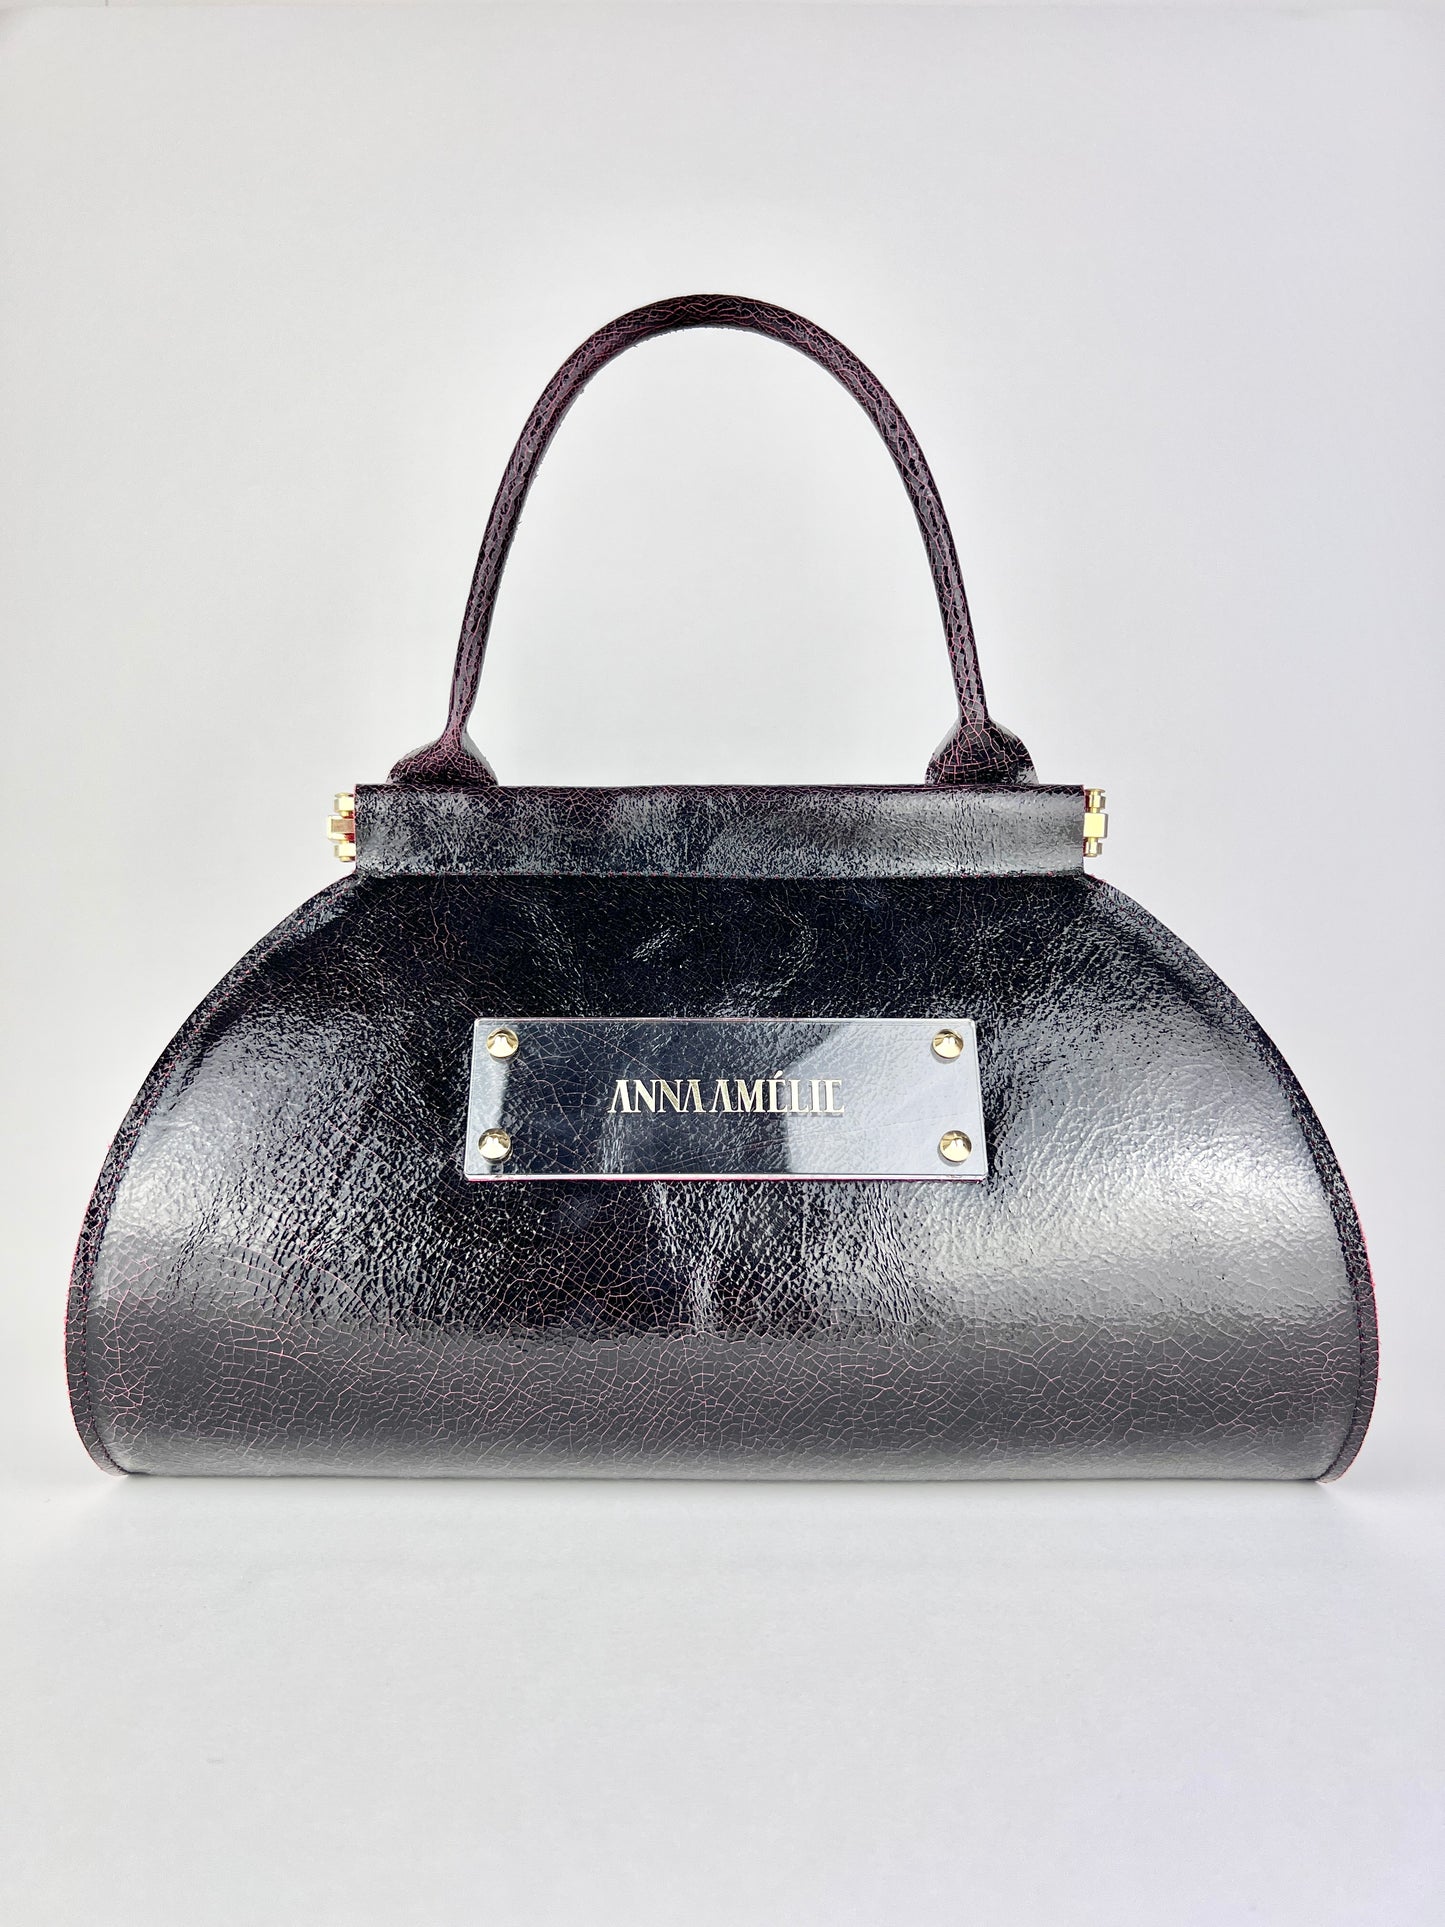 ANA “S” BAG | BLACK & RED CRACKED LEATHER